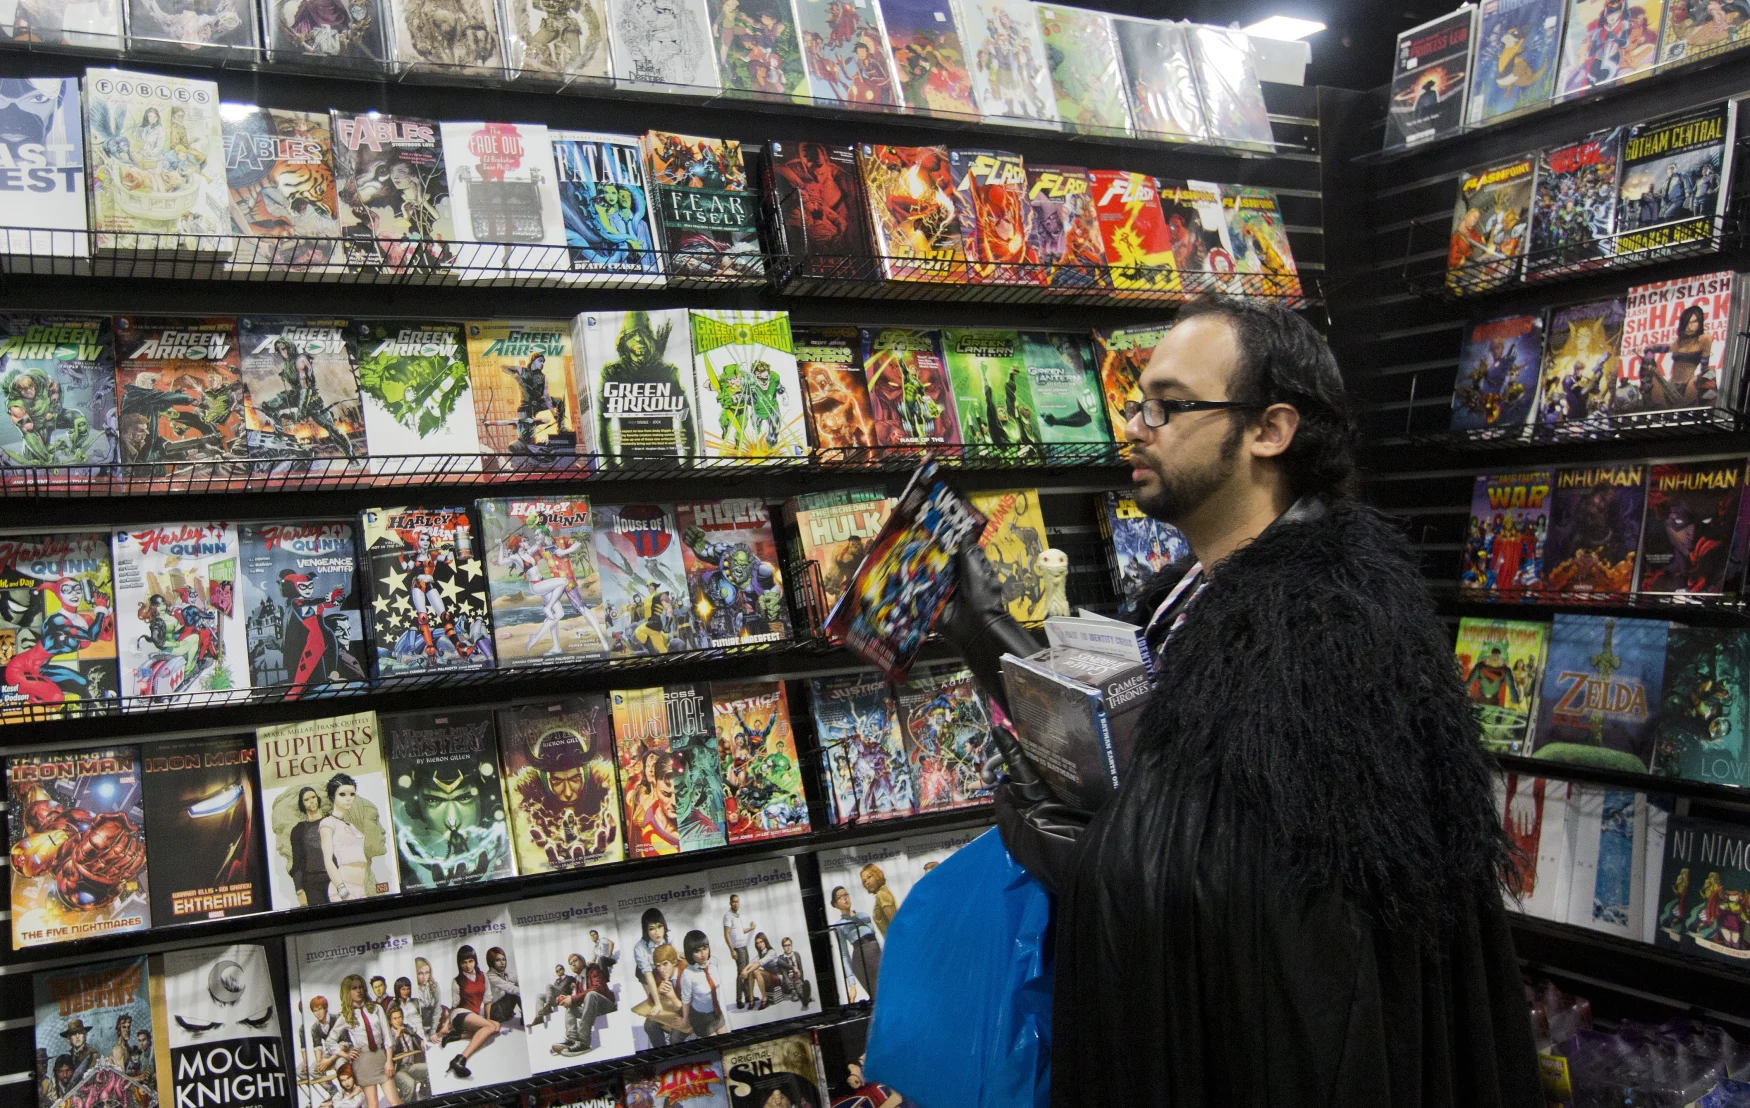 A convention attendee buys comic books at the DC Awesomecon comic book convention in Washington, DC, on May 29, 2015. AFP PHOTO/ ANDREW CABALLERO-REYNOLDS        (Photo credit should read Andrew Caballero-Reynolds/AFP via Getty Images)